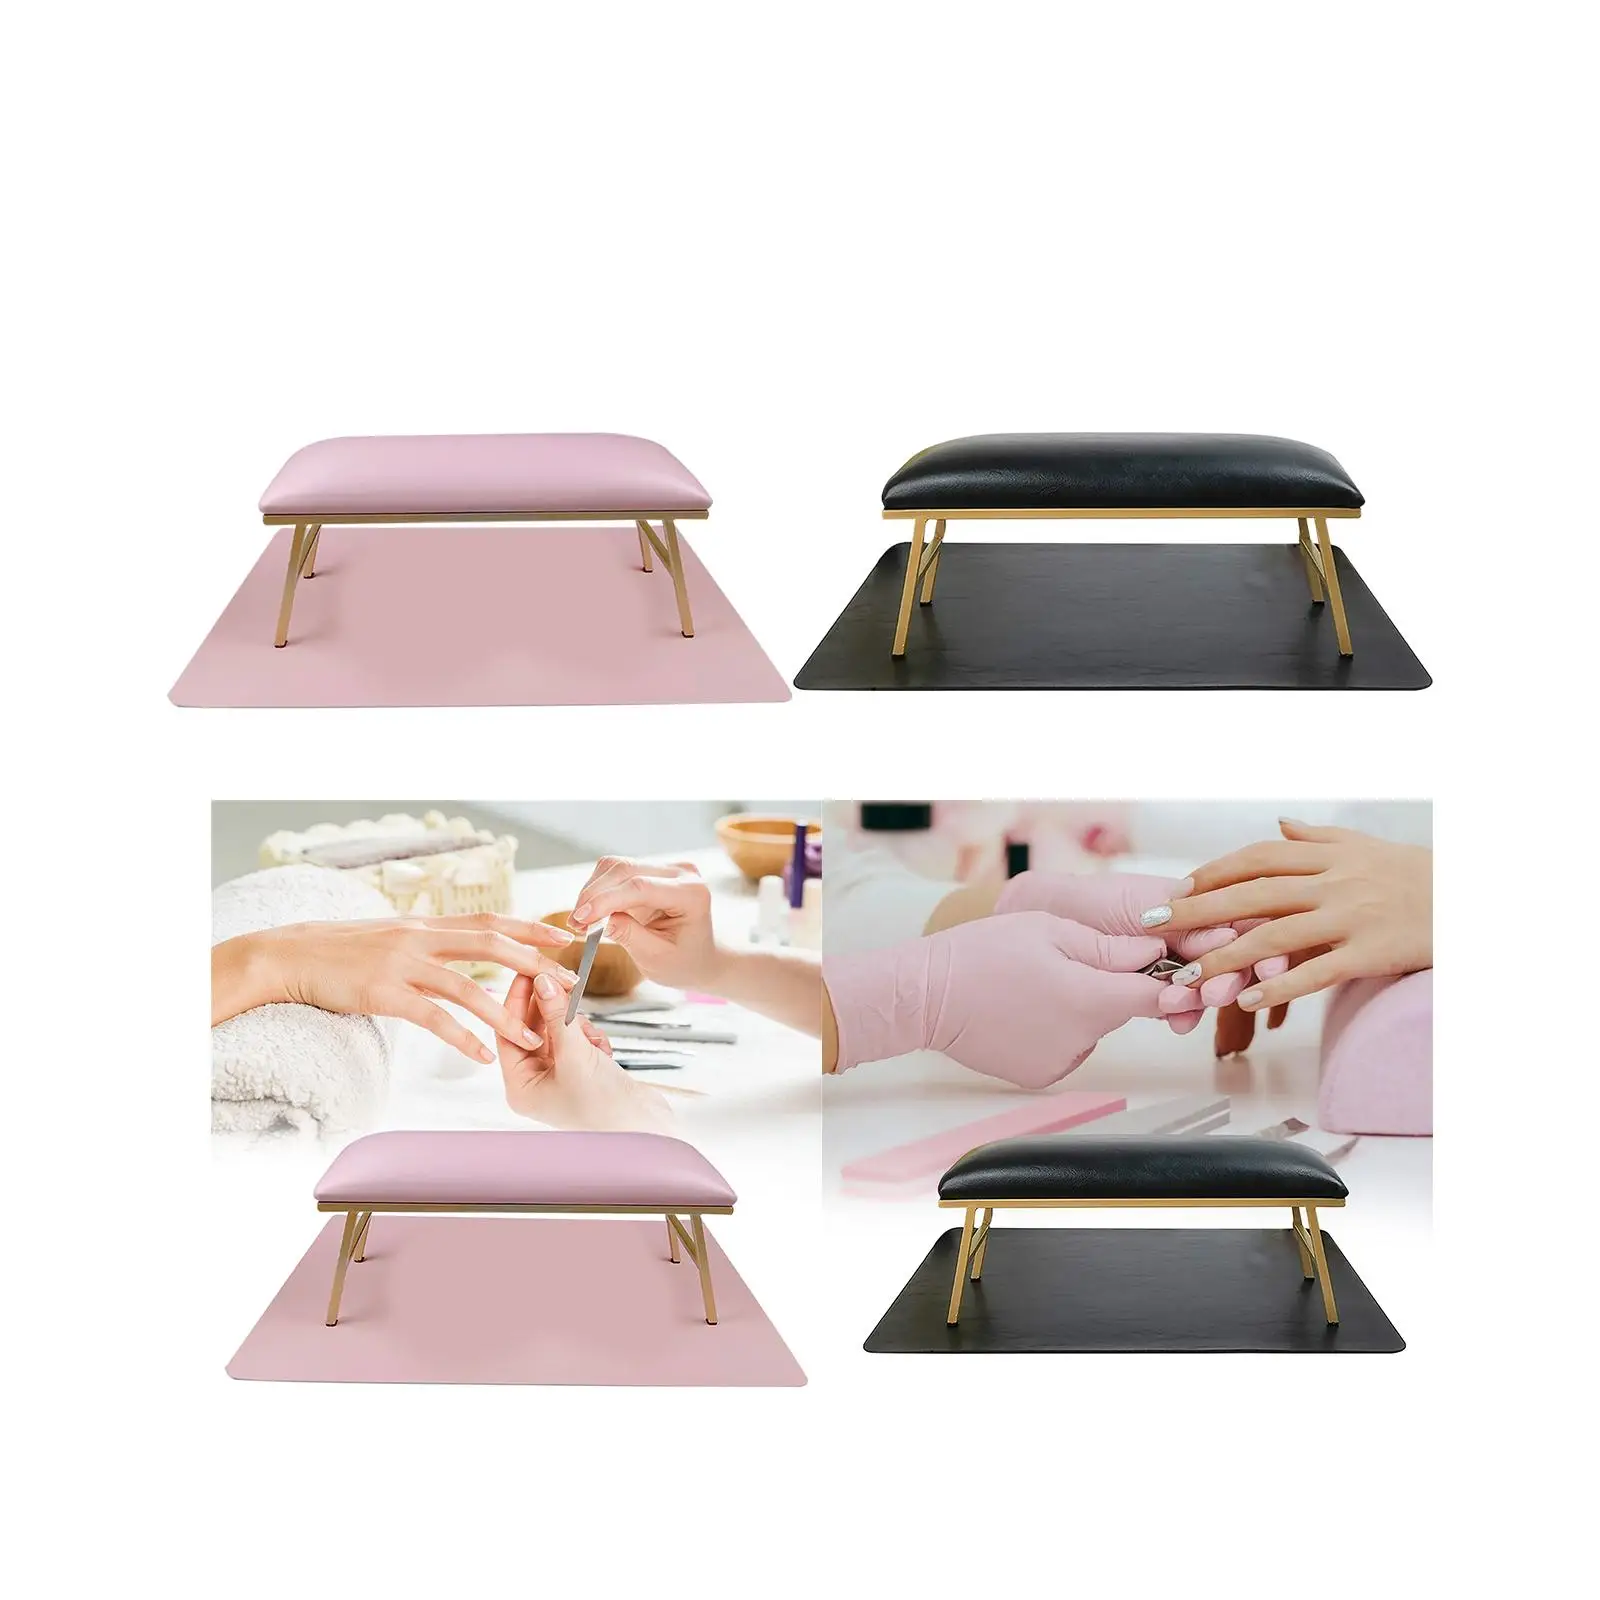 Nail Hand Pillow and Table Mat Set Accessories Table Soft Hand Cushion Nail Hand Rest Cushion for Home Manicurist Salon Arm